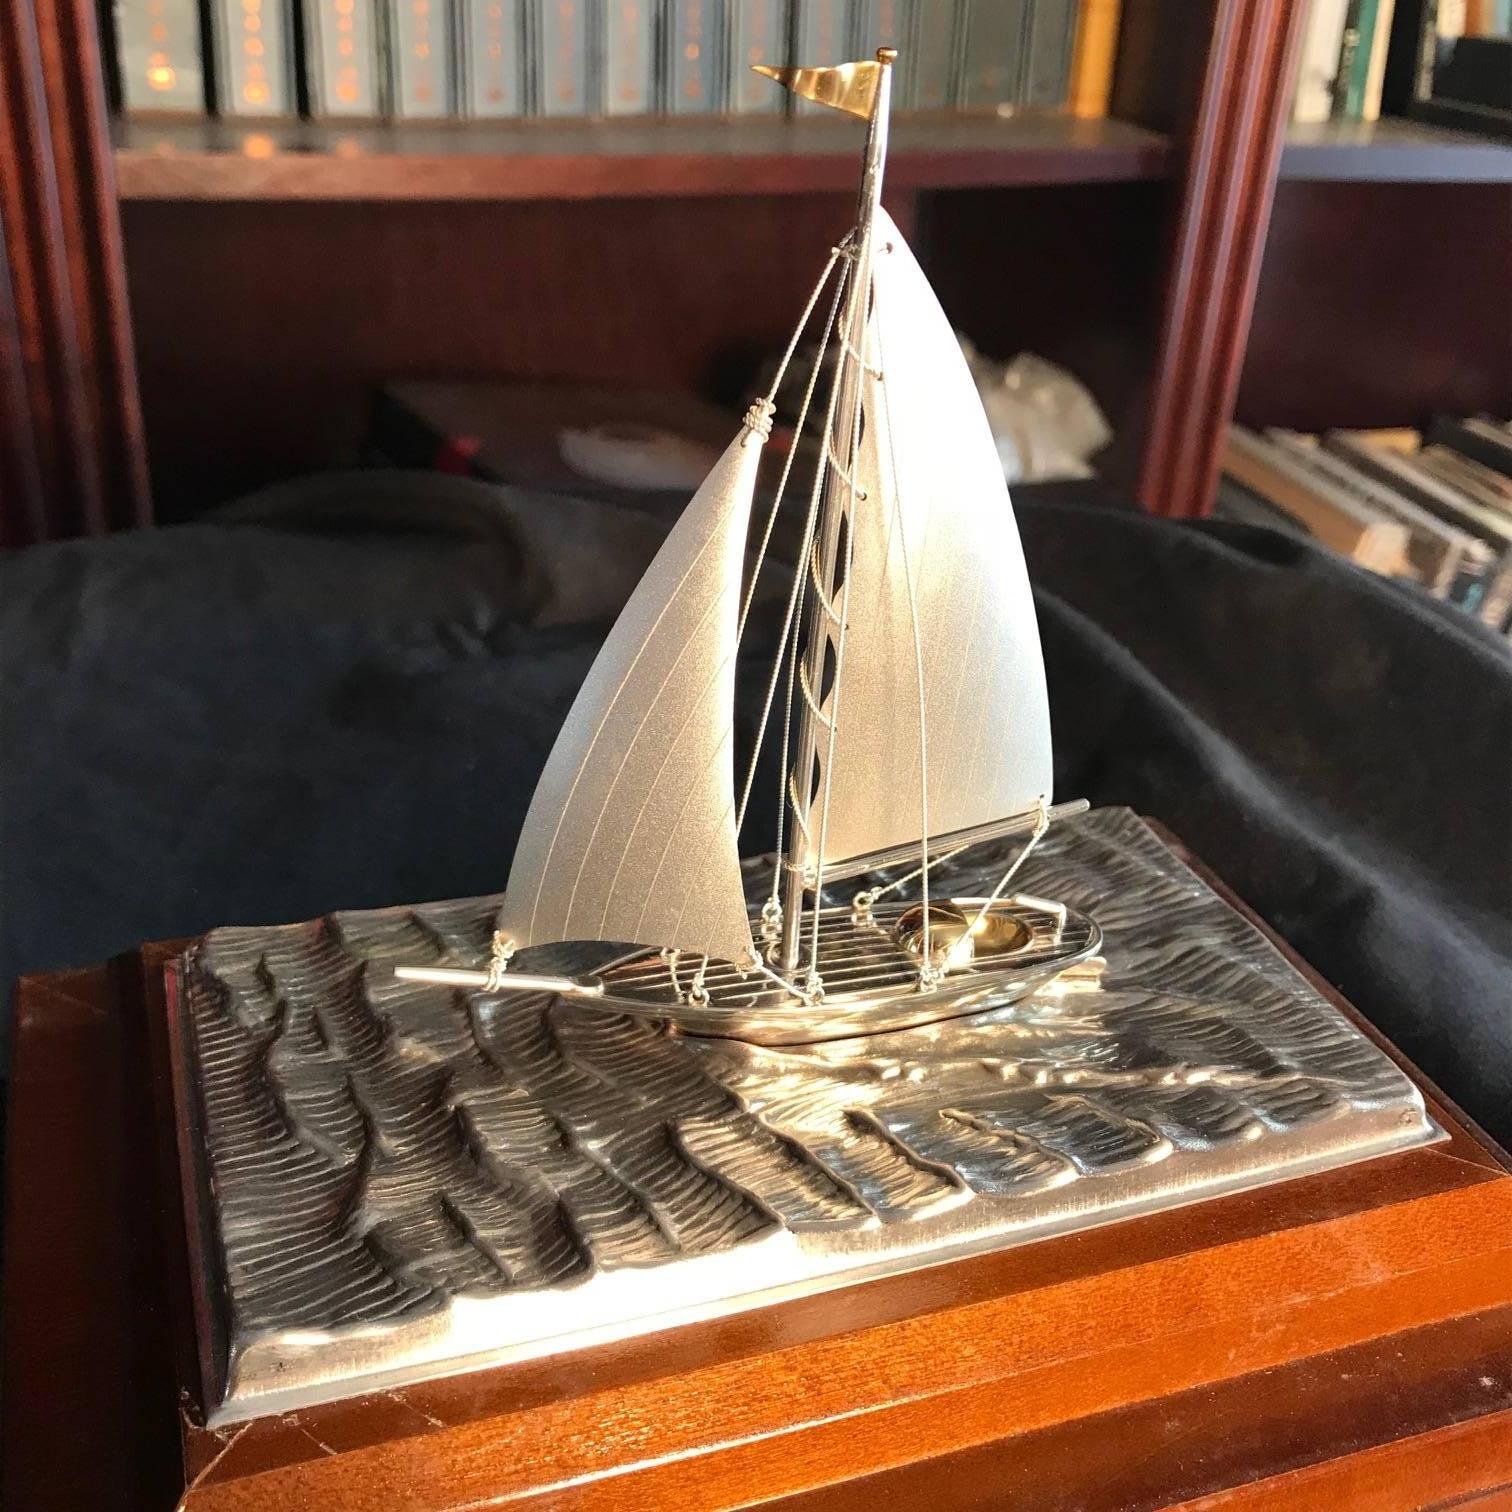 Hand-Crafted Japan Handmade Sterling Silver Yachting Sailing Vessel Mint, Signed and Boxed